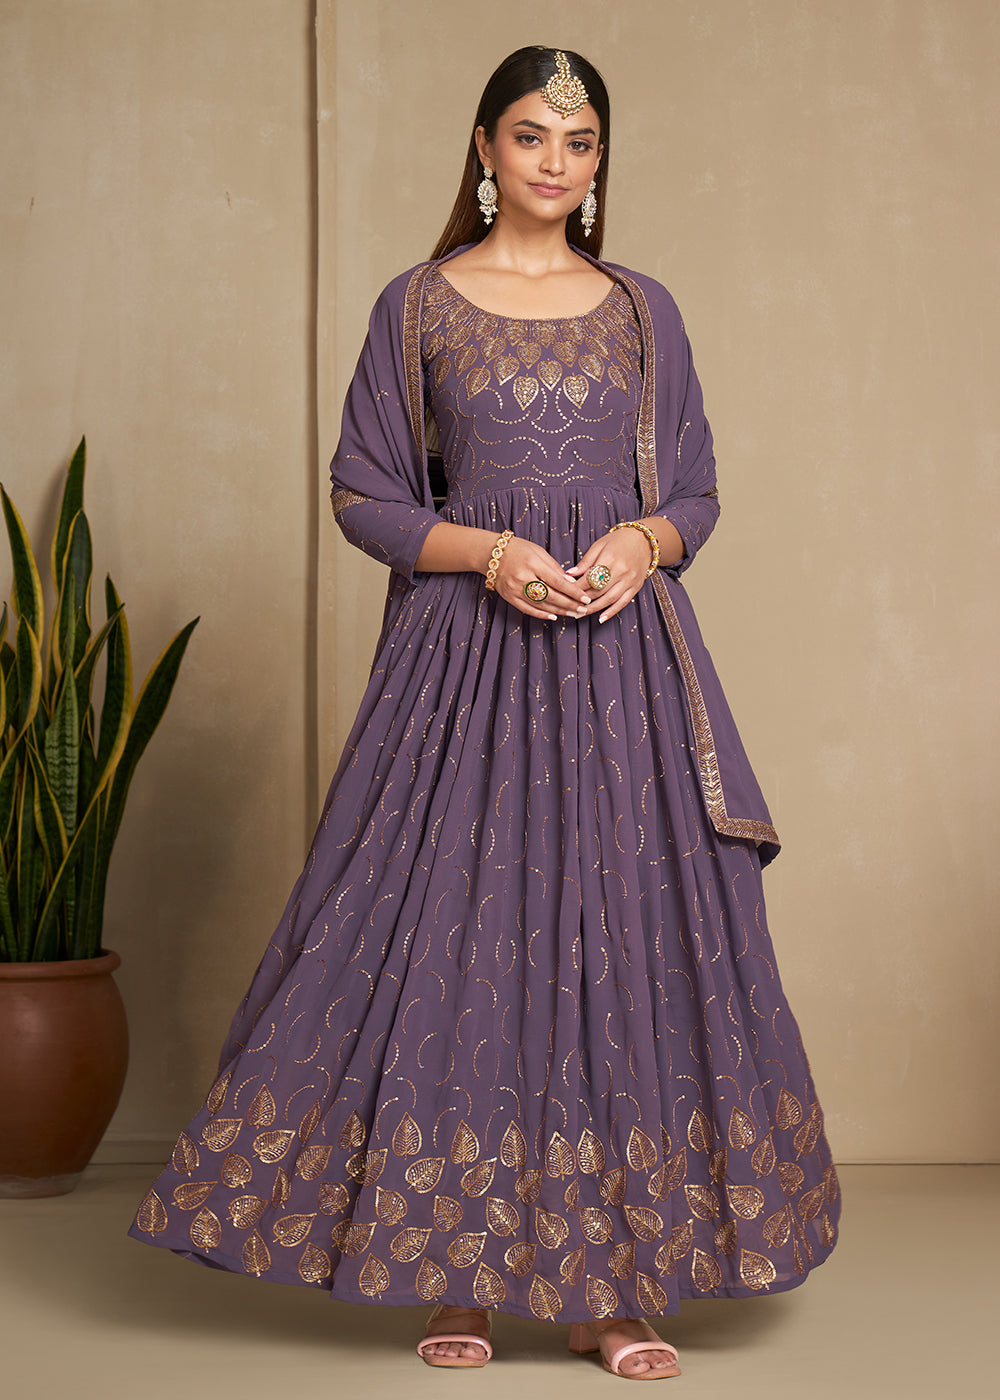 Buy Now Zari & Sequins Embroidered Lavender Anarkali Suit Online in USA, UK, Australia, New Zealand, Canada & Worldwide at Empress Clothing. 